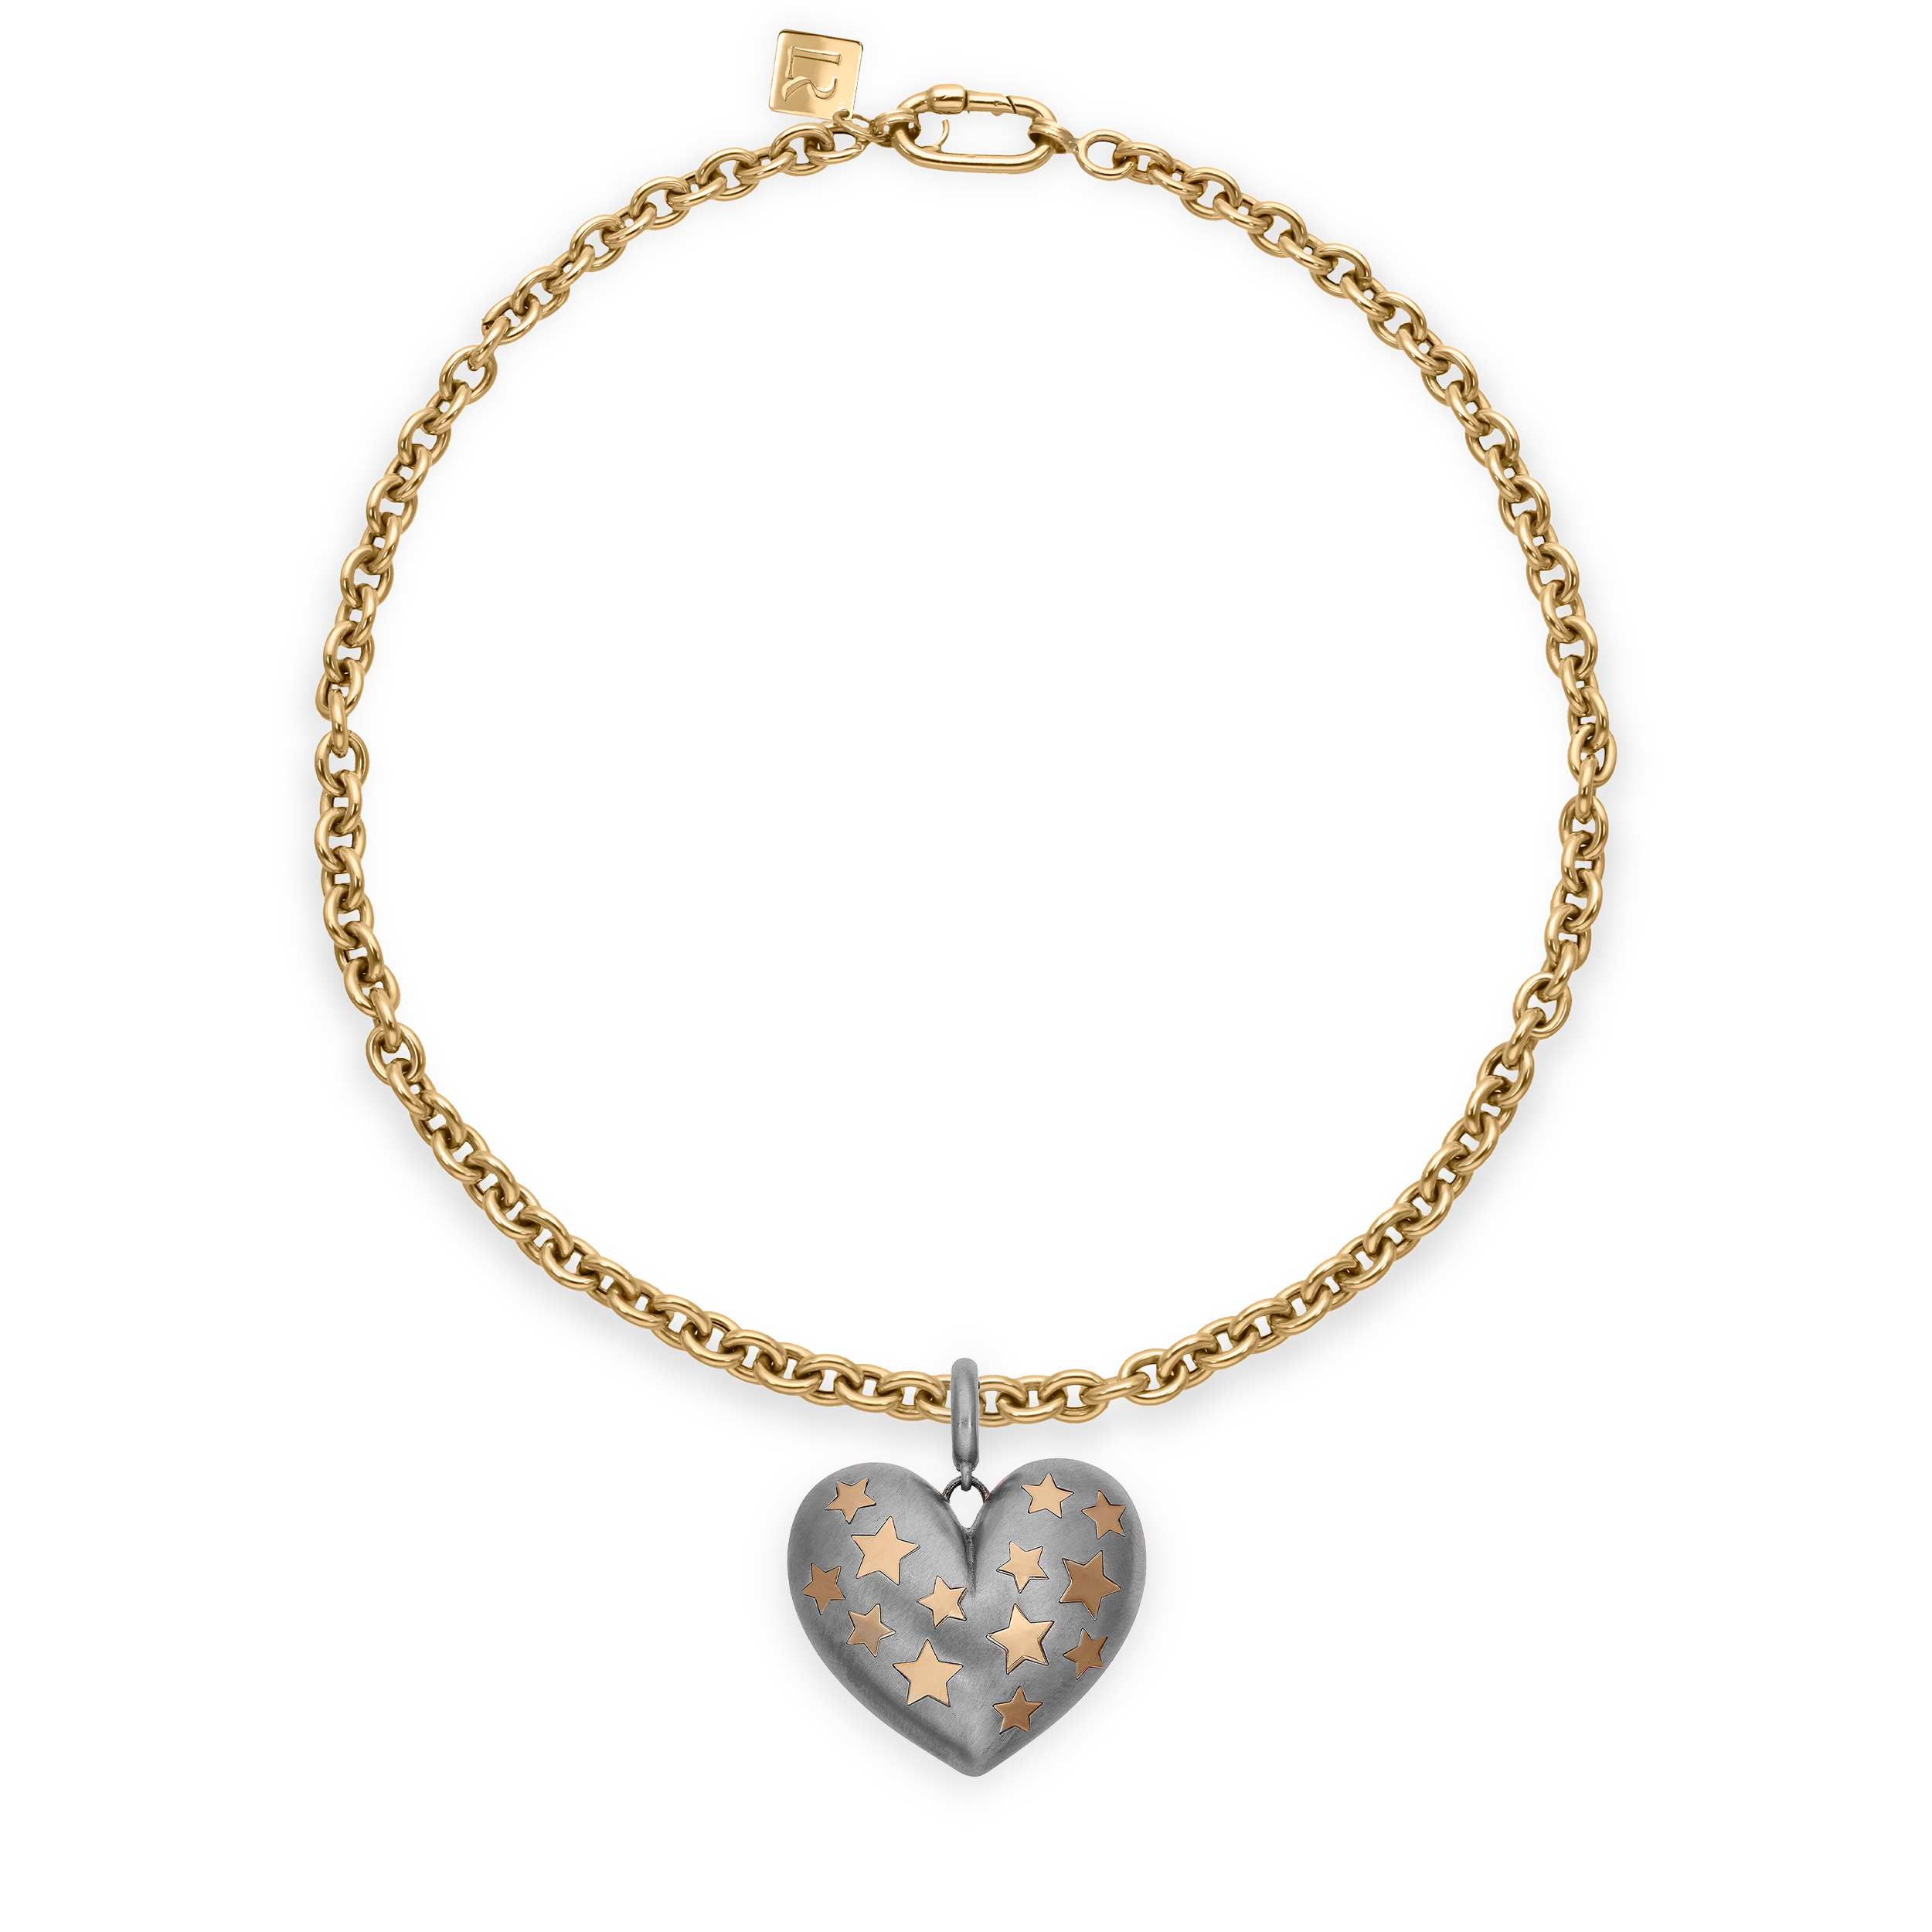 Paulette Brushed White Gold Heart with Yellow Gold Stars Pendant on Necklace